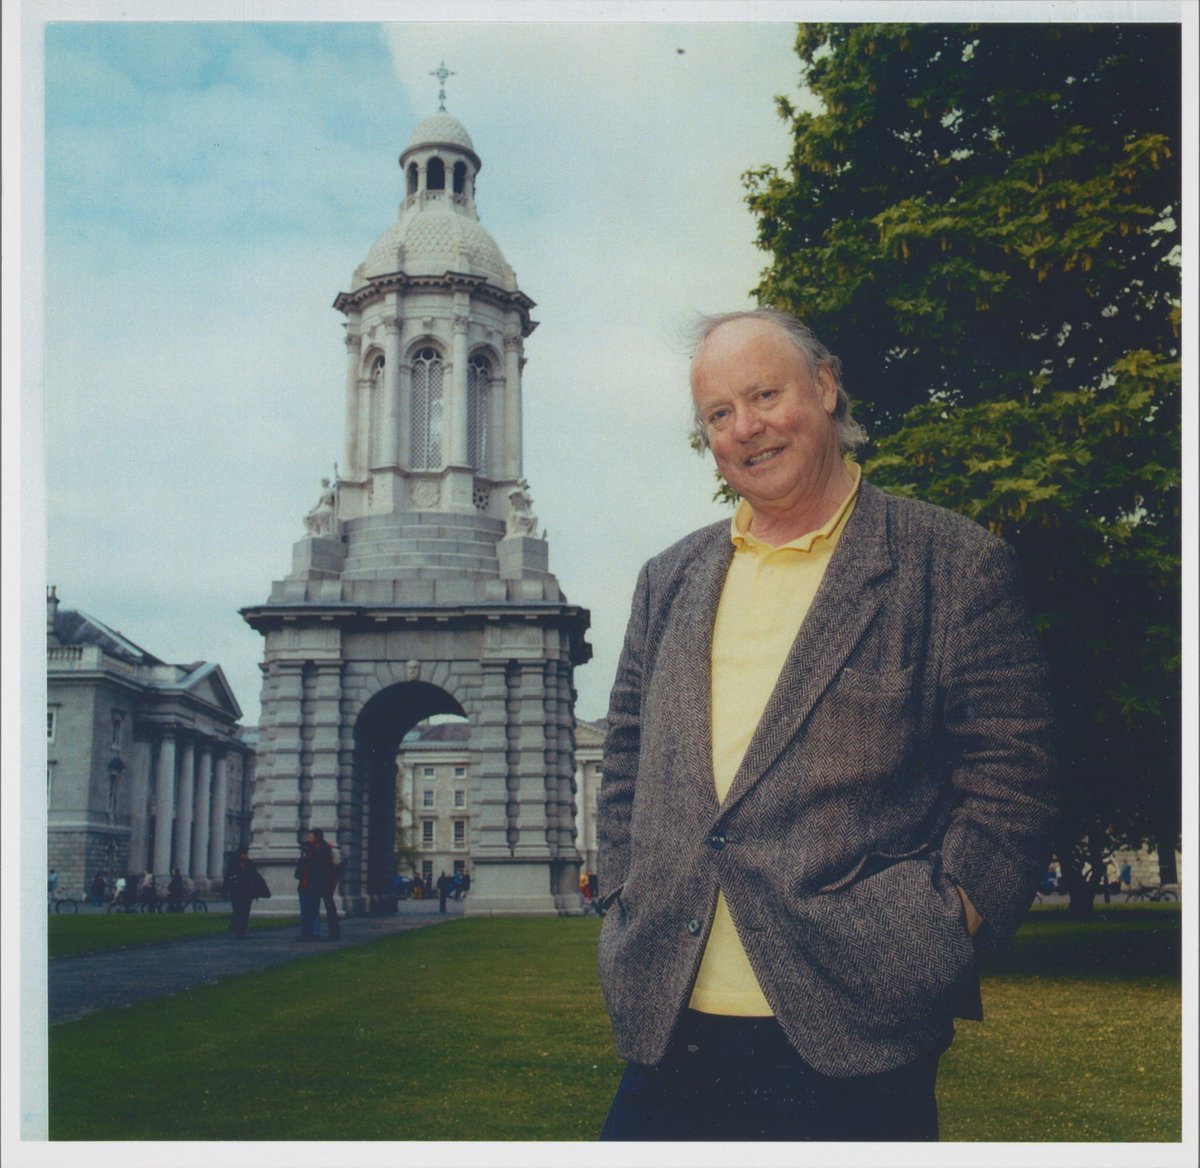 To mark what would have been Professor Brendan Kennelly’s 88th birthday, we wanted to share some insights into his archive collection which is currently being catalogued as part of a #VirtualTrinityLibrary project and the inspiration behind ‘Cromwell.’ @KennellyTrust @tcdlibrary